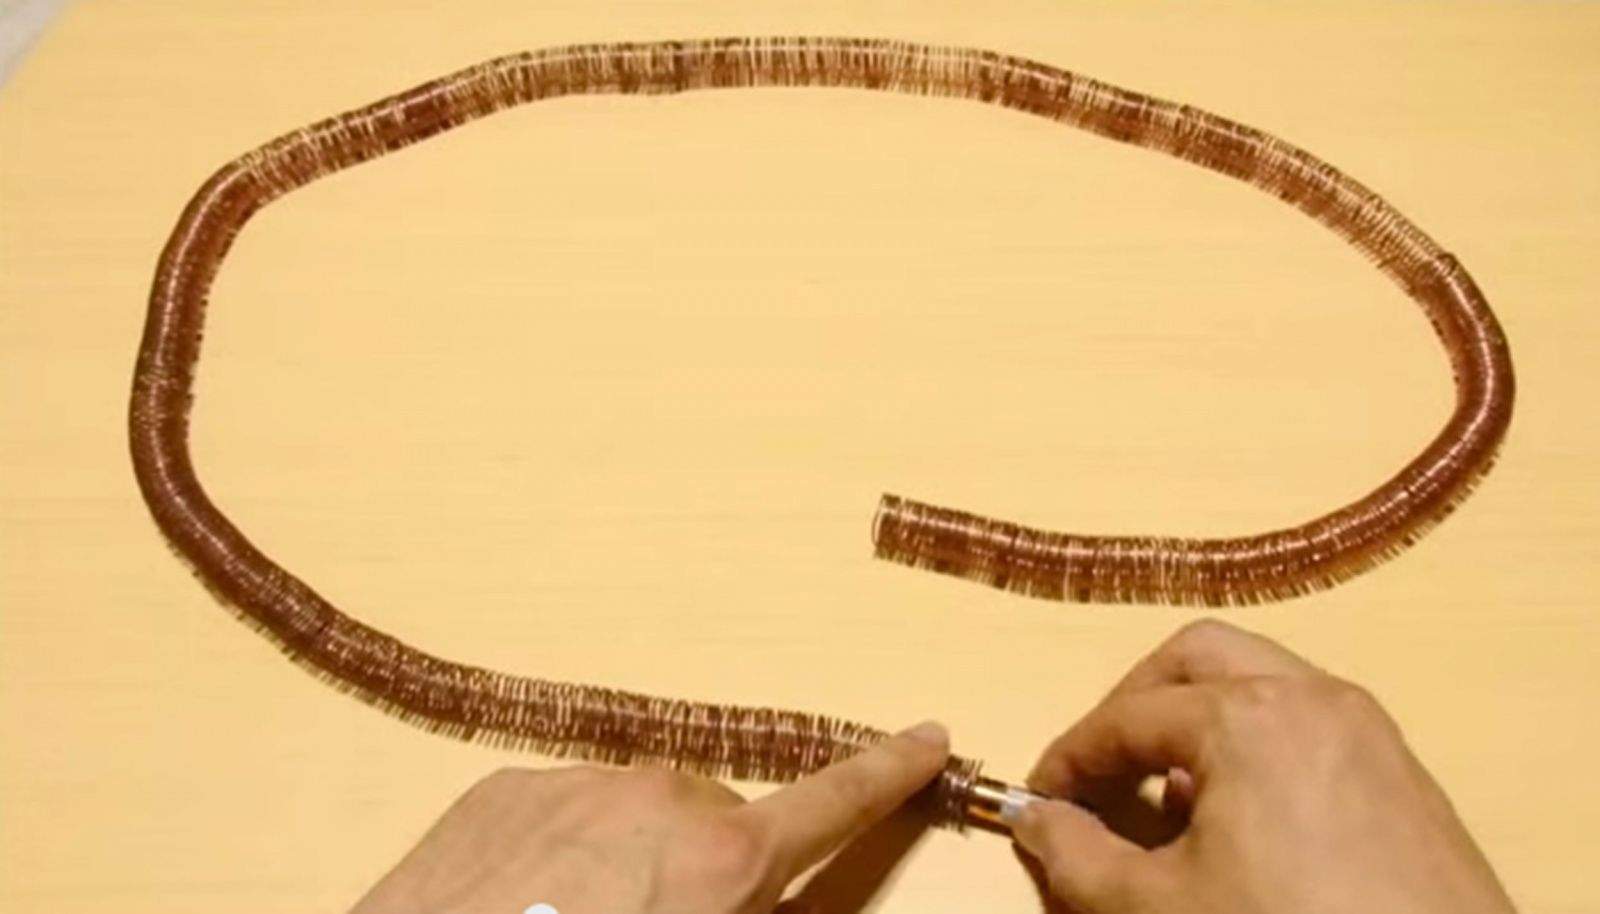 Transform copper wire, magnets and a battery into a simple electric train. Screen grab from Amazing Science YouTube video